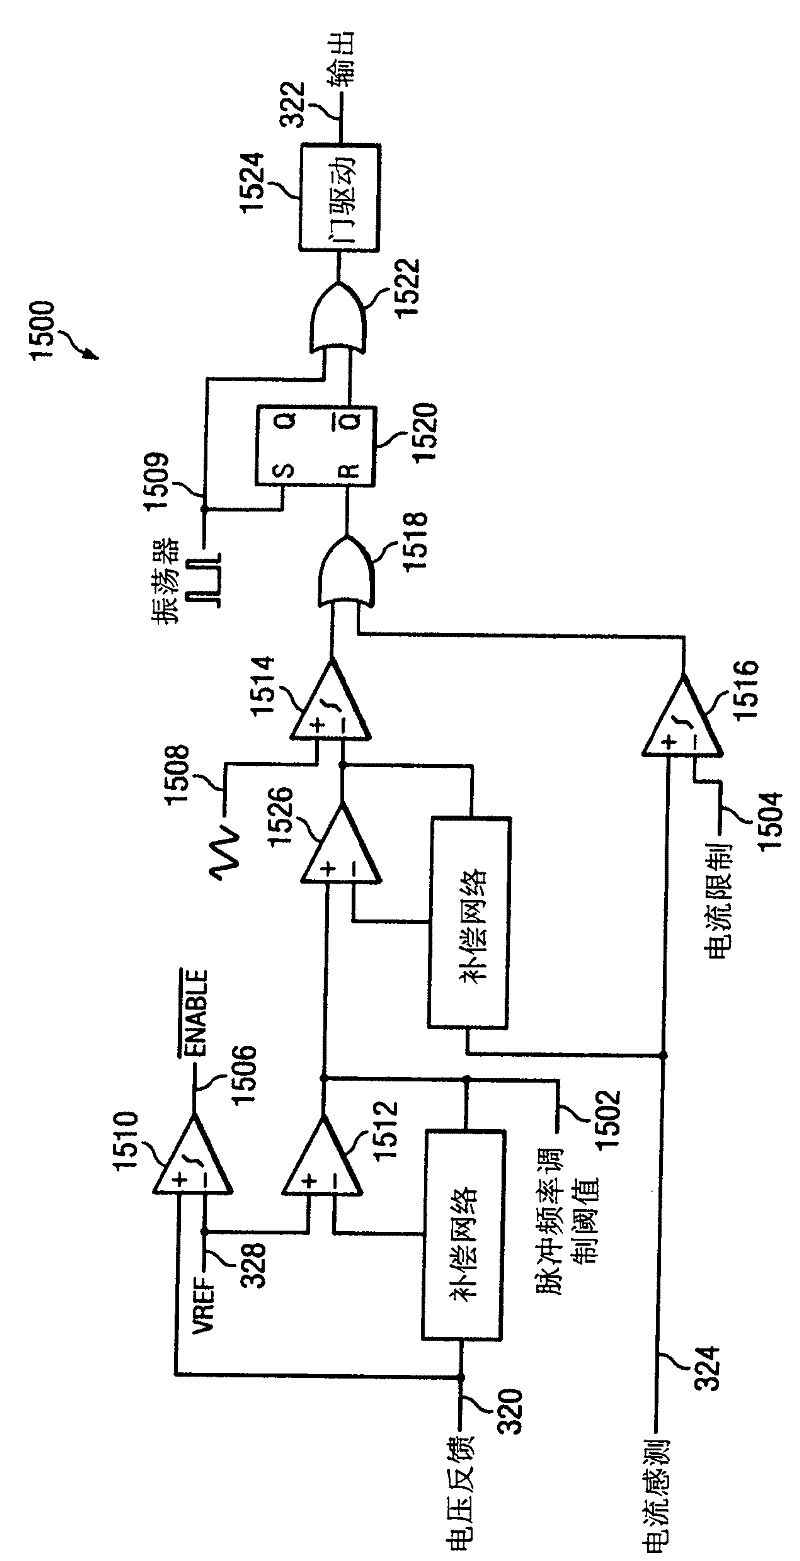 System, method and apparatus to transition between pulse-width modulation and pulse-frequency modulation in a switch mode power supply